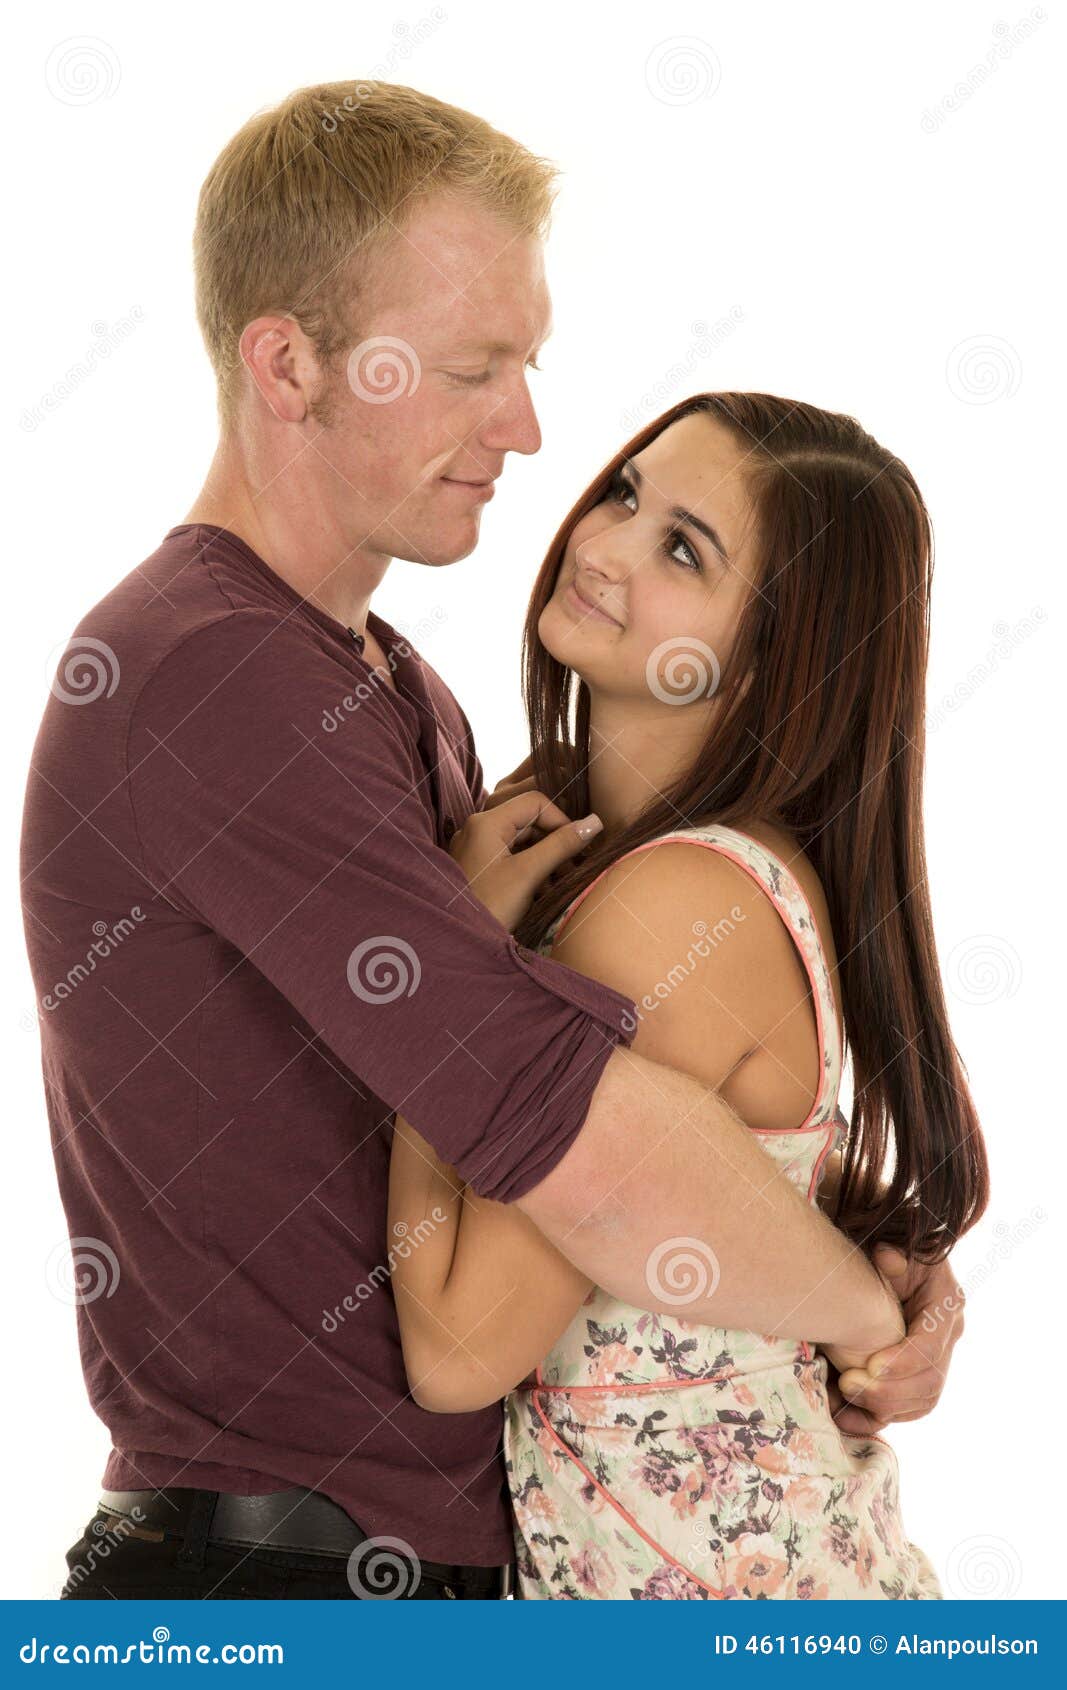 Man Arms Around A Woman Look At Each Other Stock Photo  Image 46116940